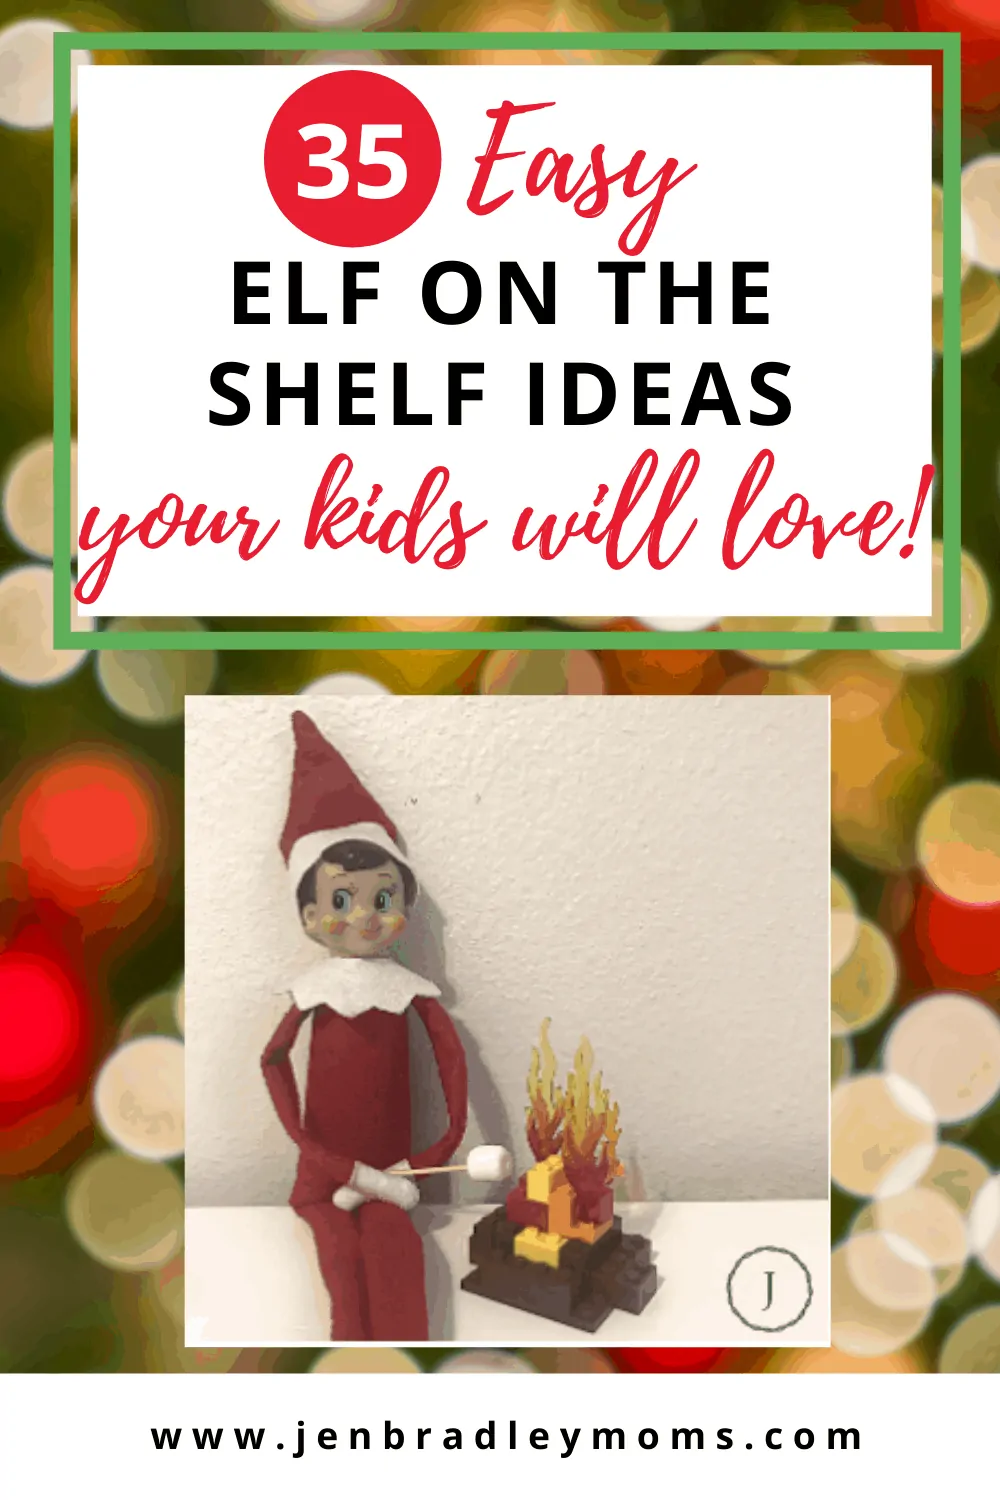 45 Easy Last Minute Elf on the Shelf Ideas Your Kids Will Love